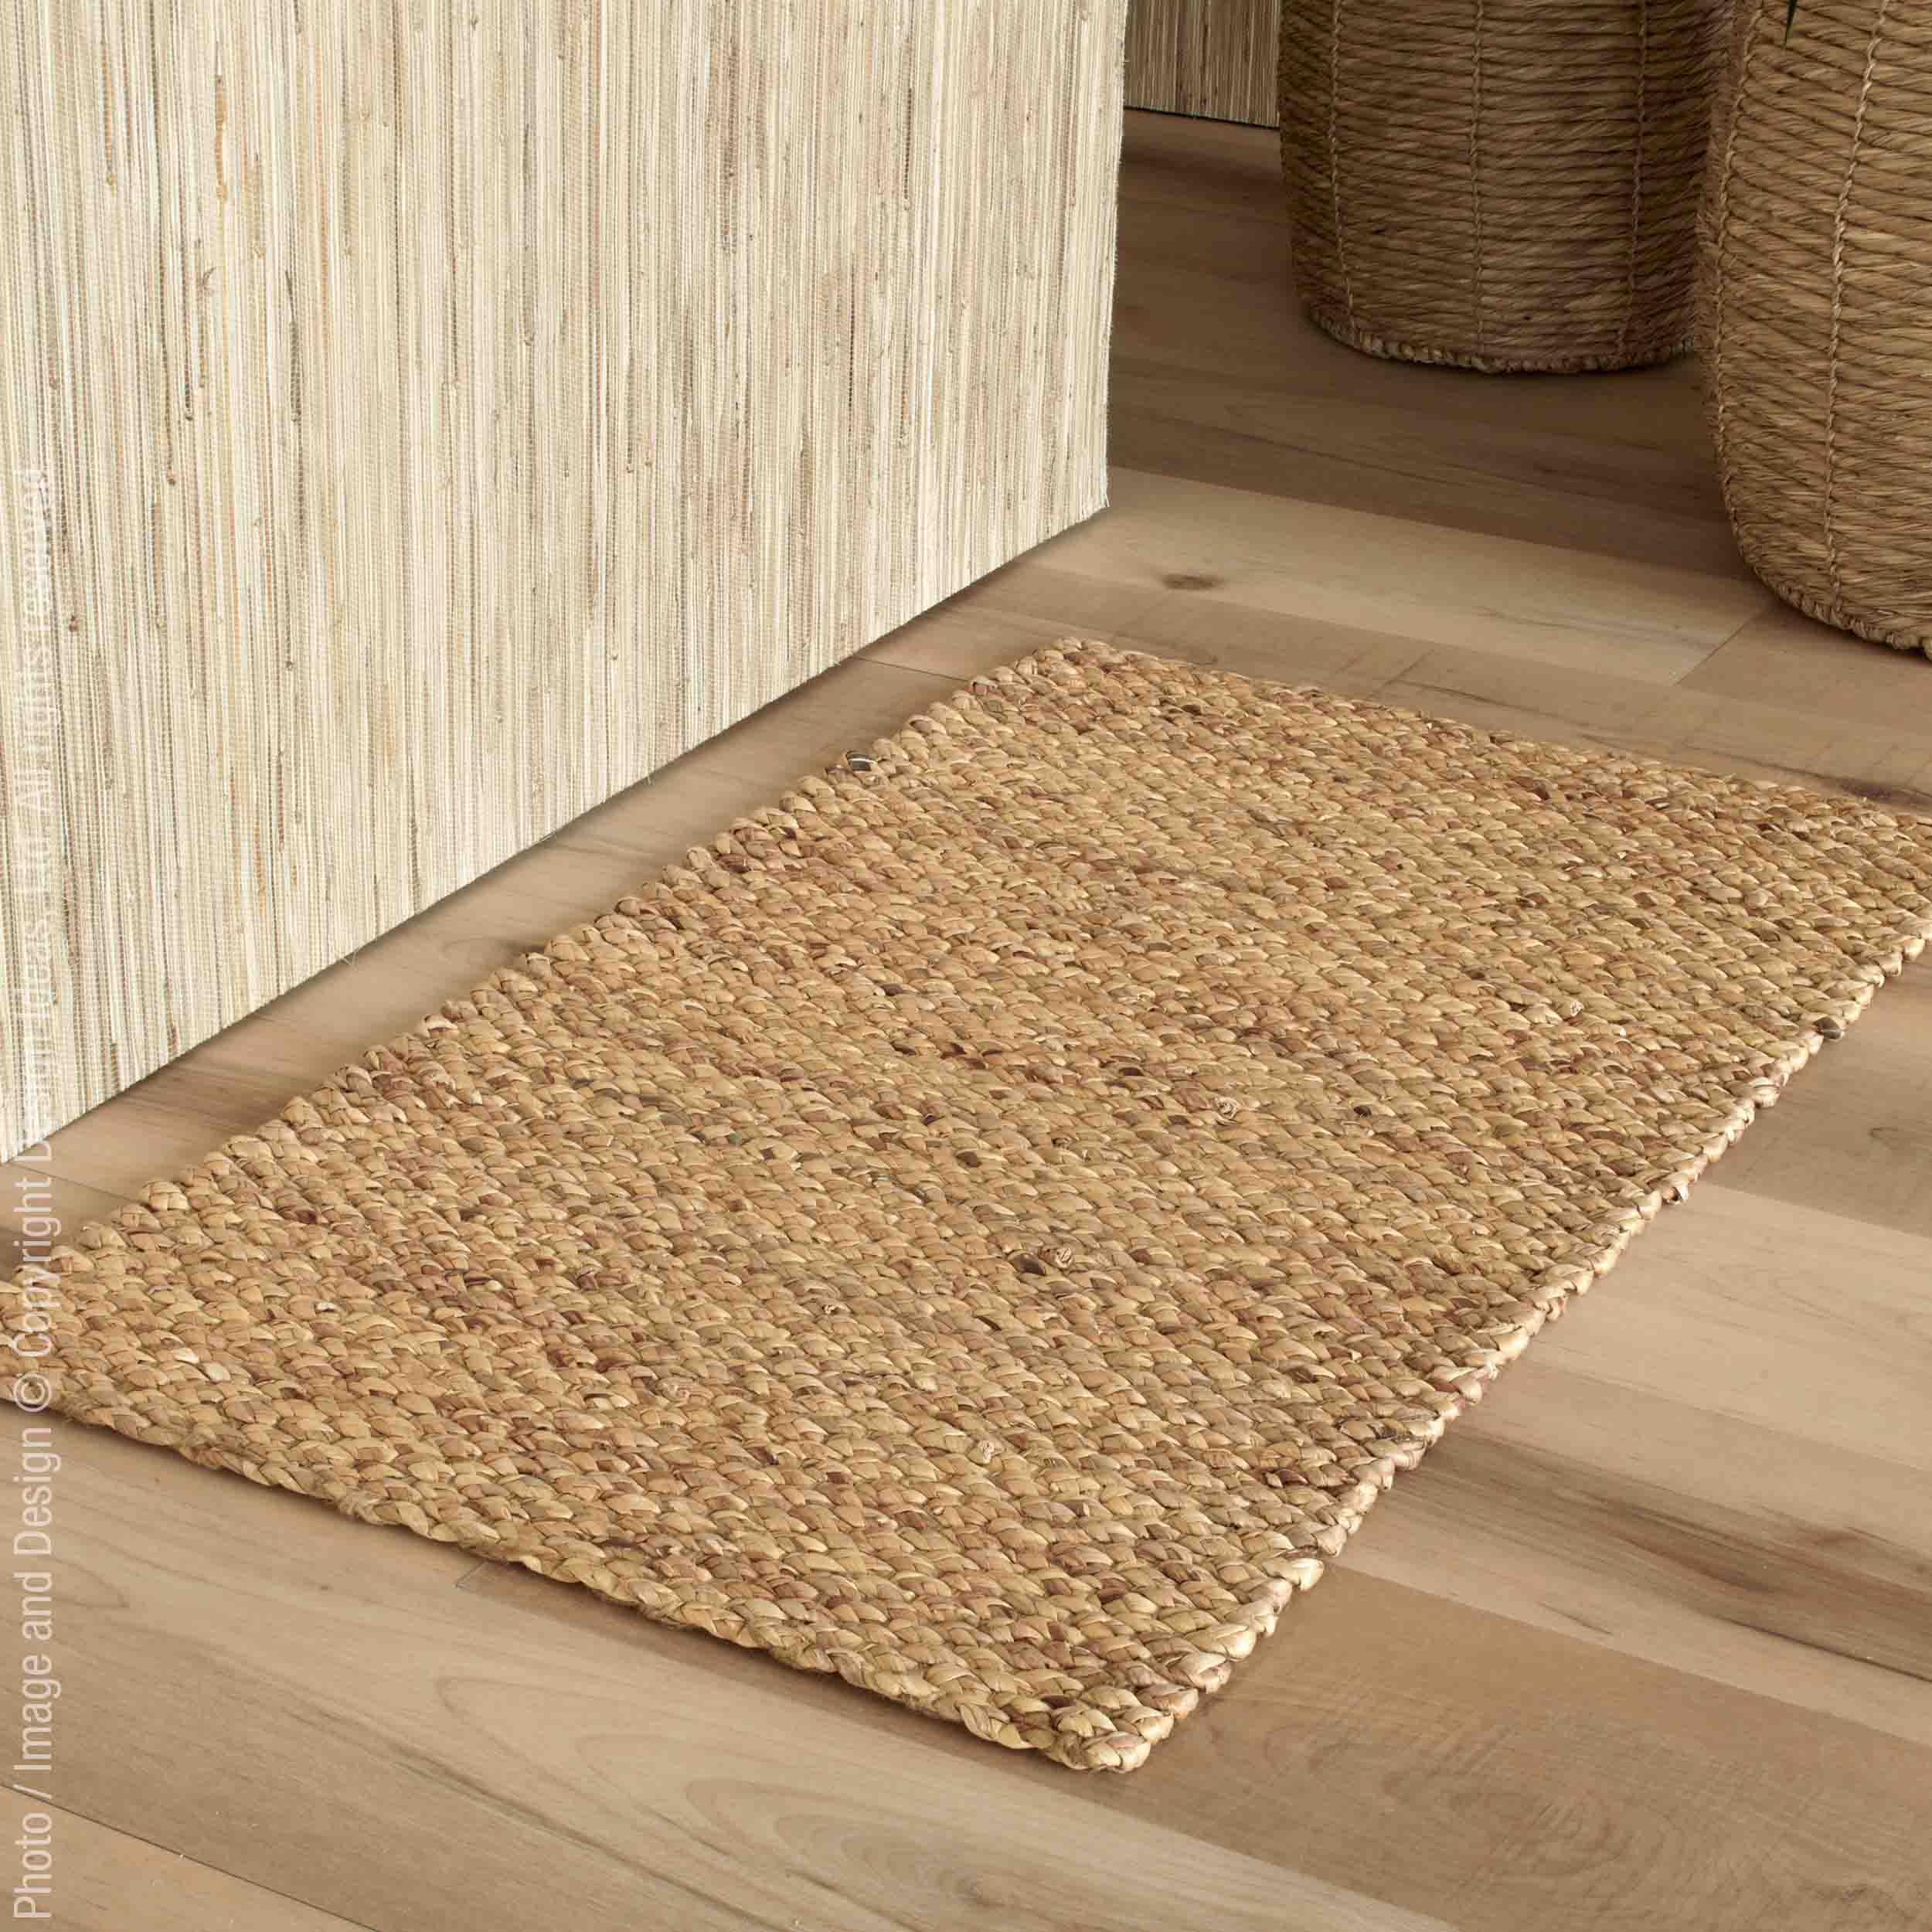 Trieste™ rug (35x24in.) - Natural | Image 1 | Premium Rug from the Trieste collection | made with Water Hyacinth Twine for long lasting use | texxture